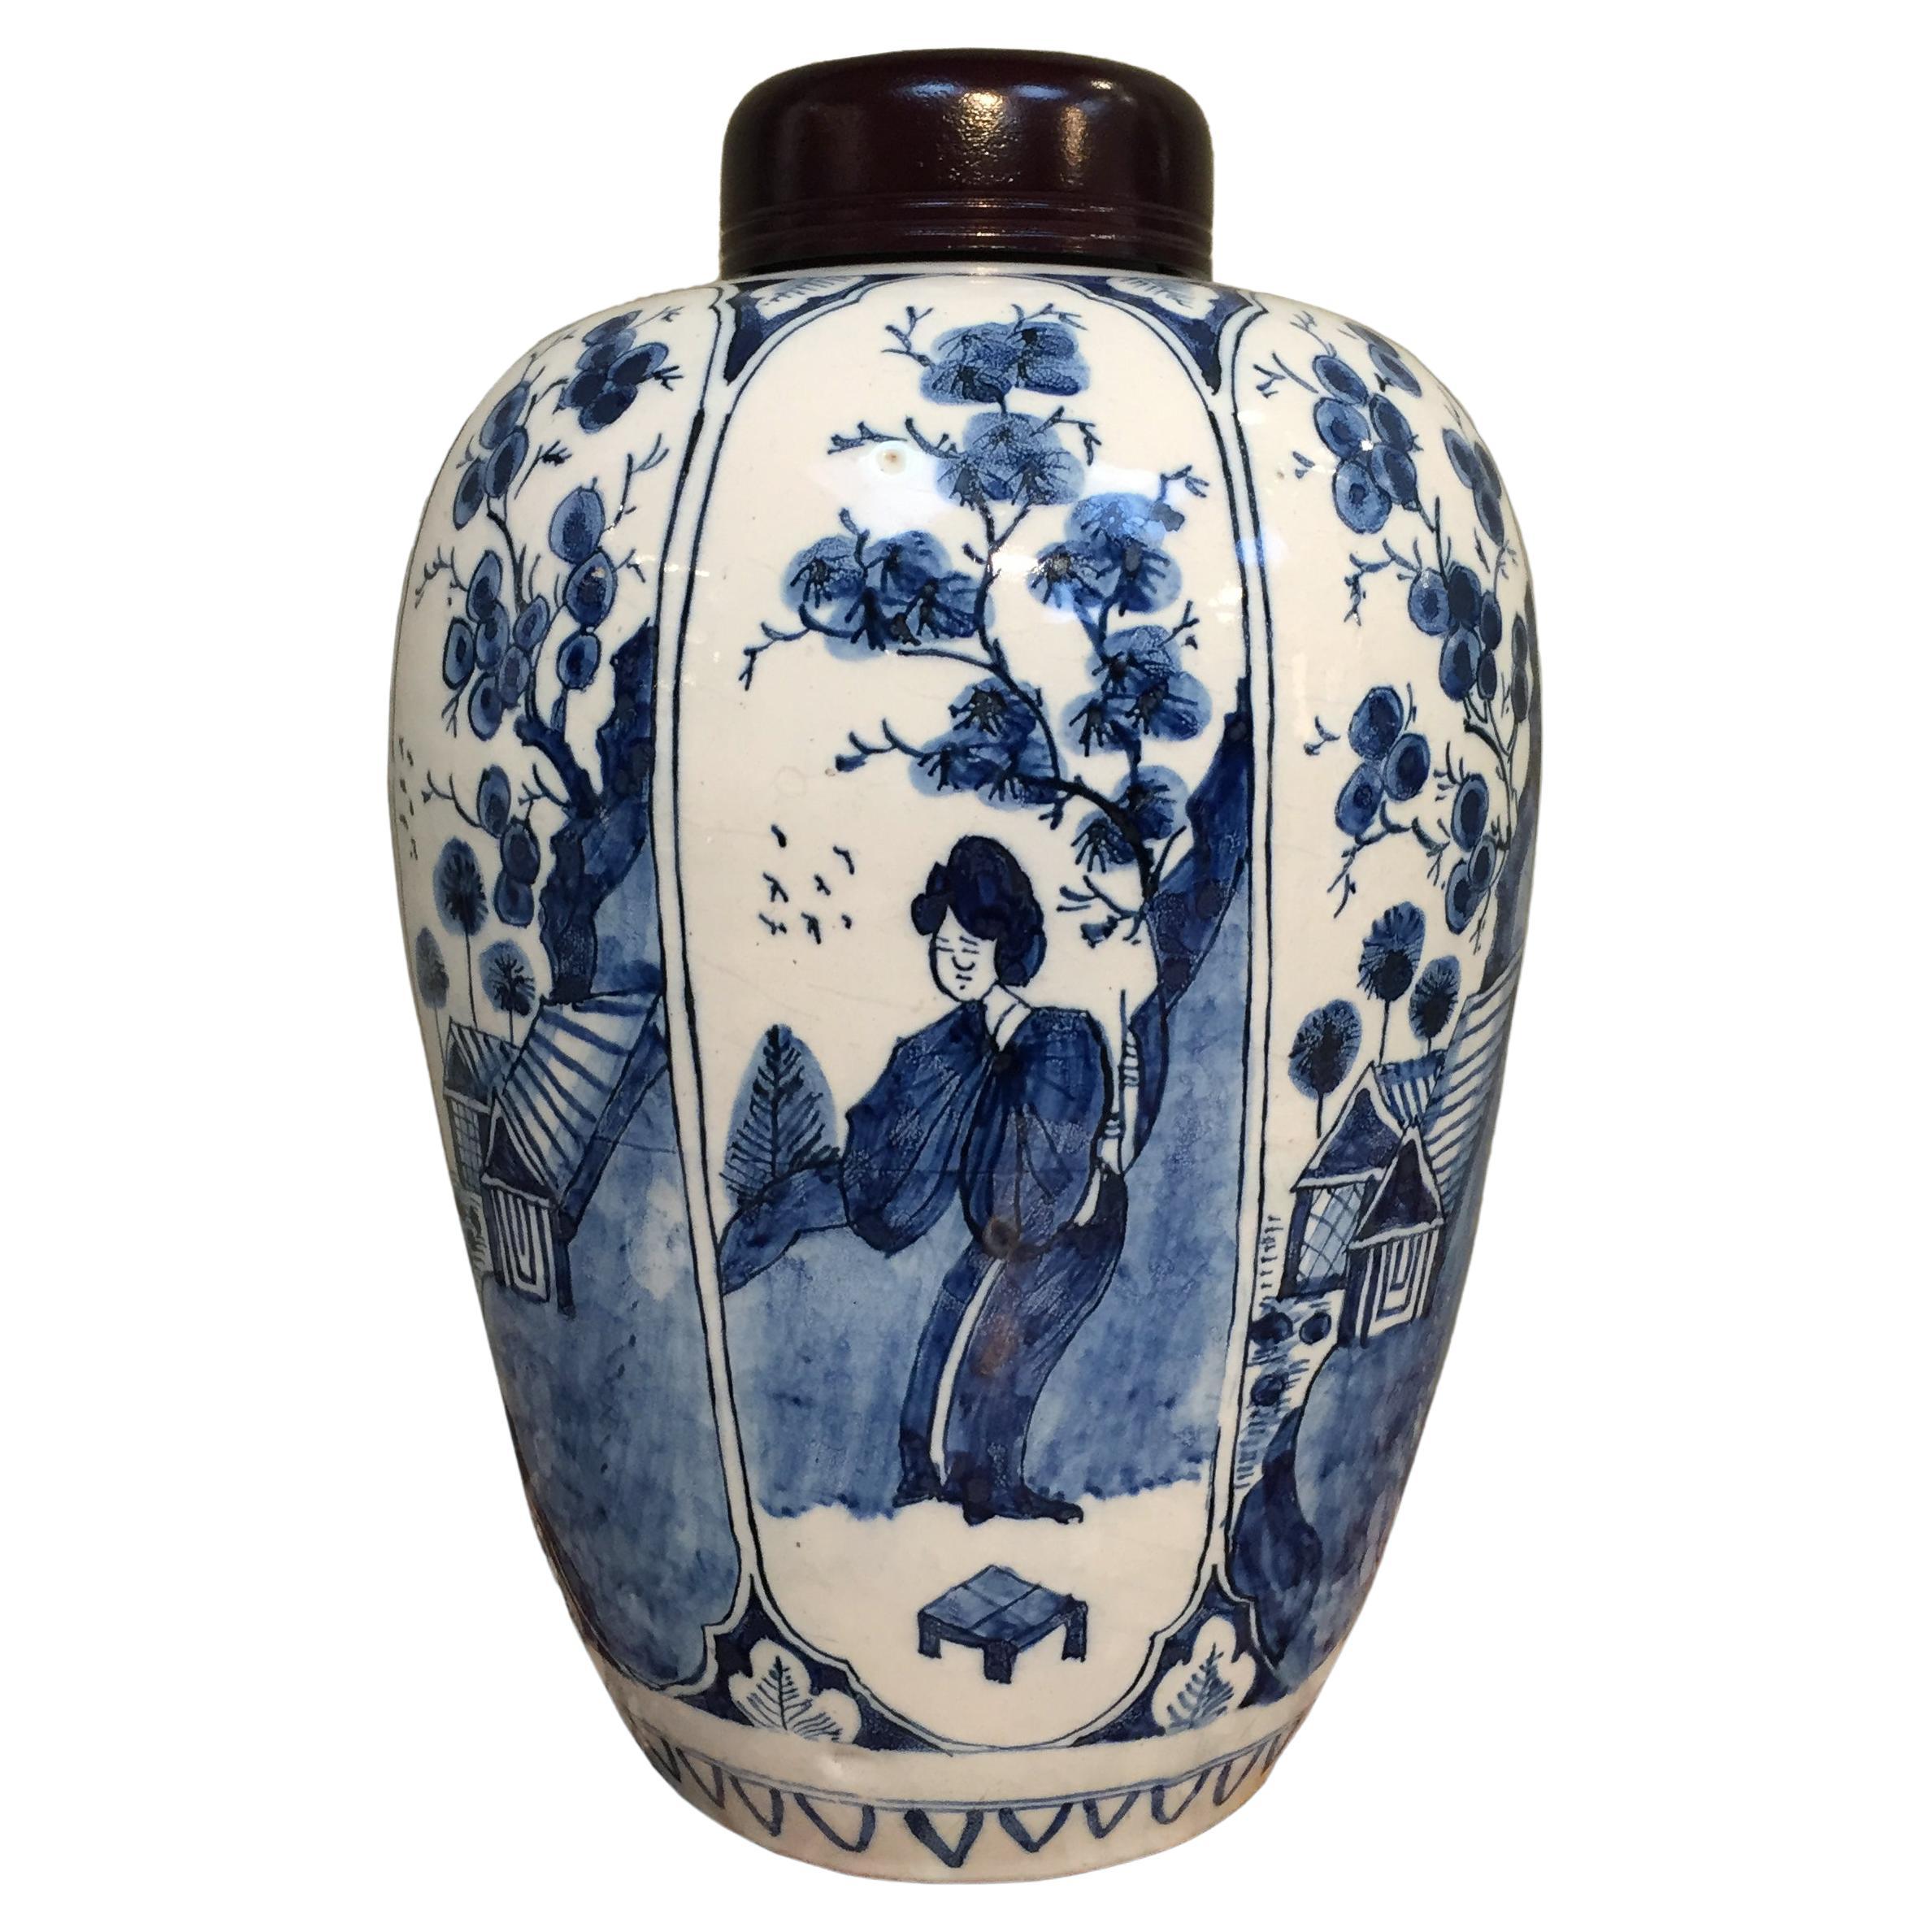 Blue and White Dutch Delft Lidded Jar in Chinoiserie, Early 18th Century